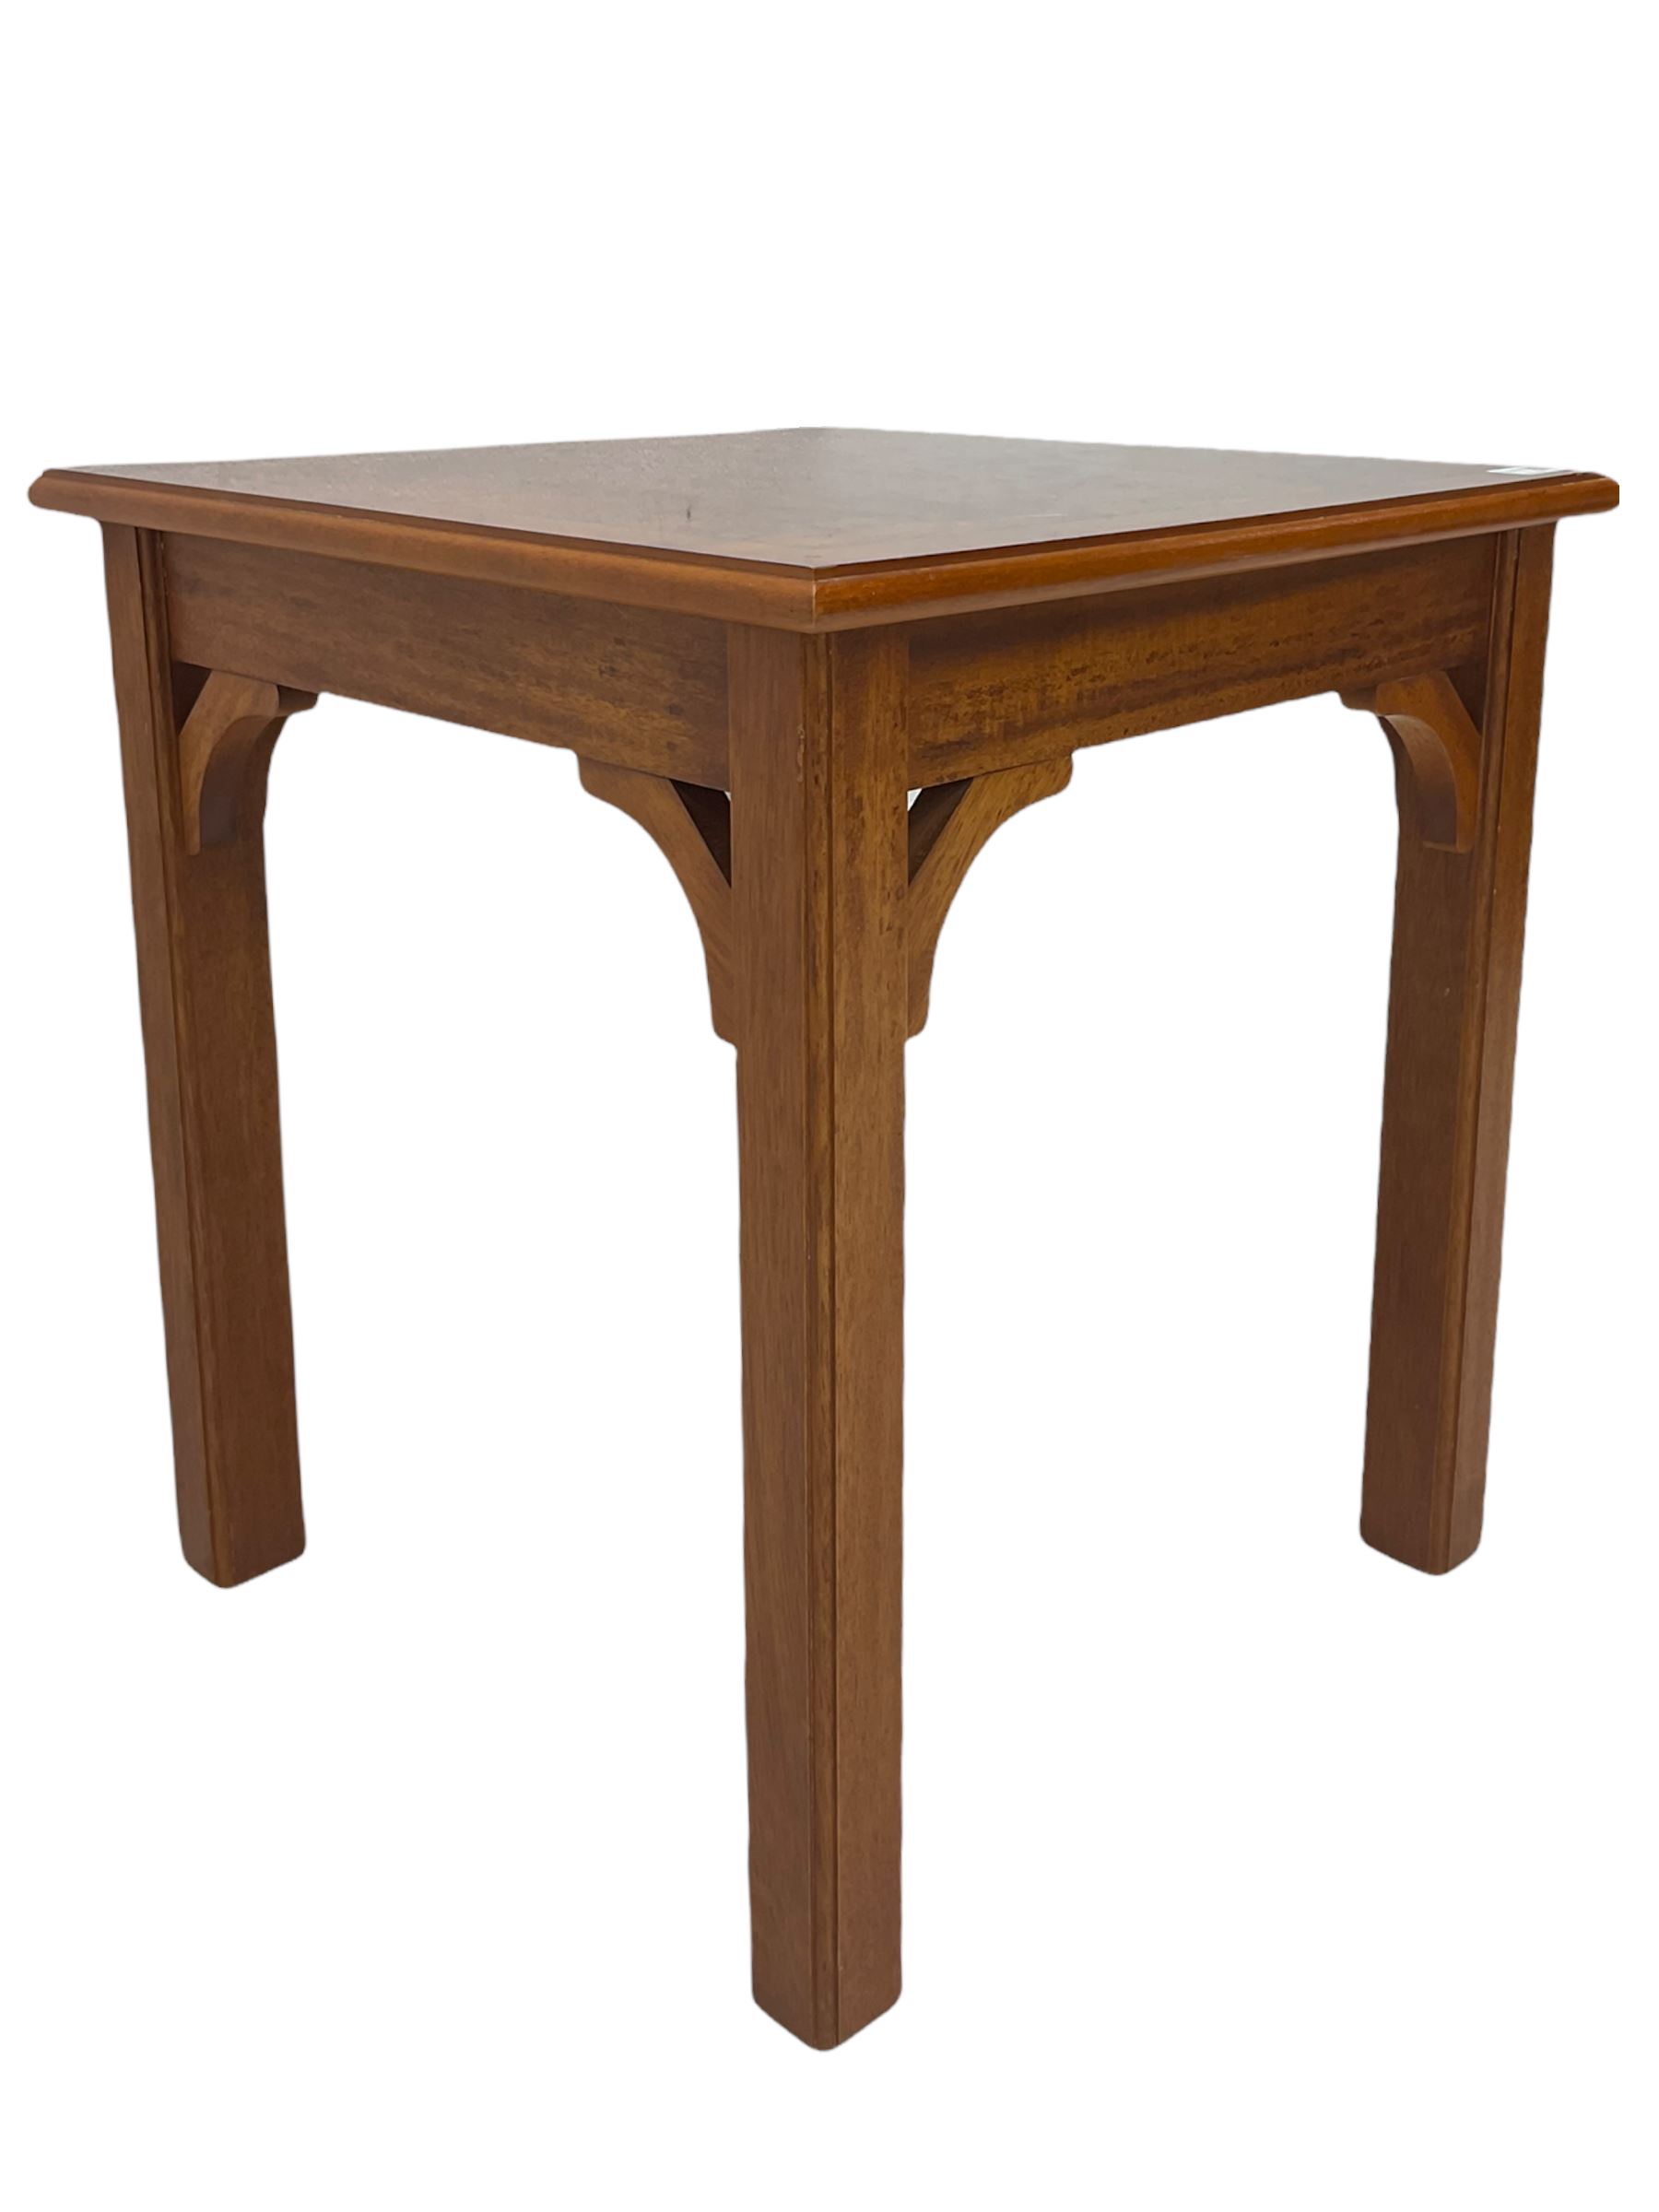 Yew wood square lamp table - Image 4 of 6